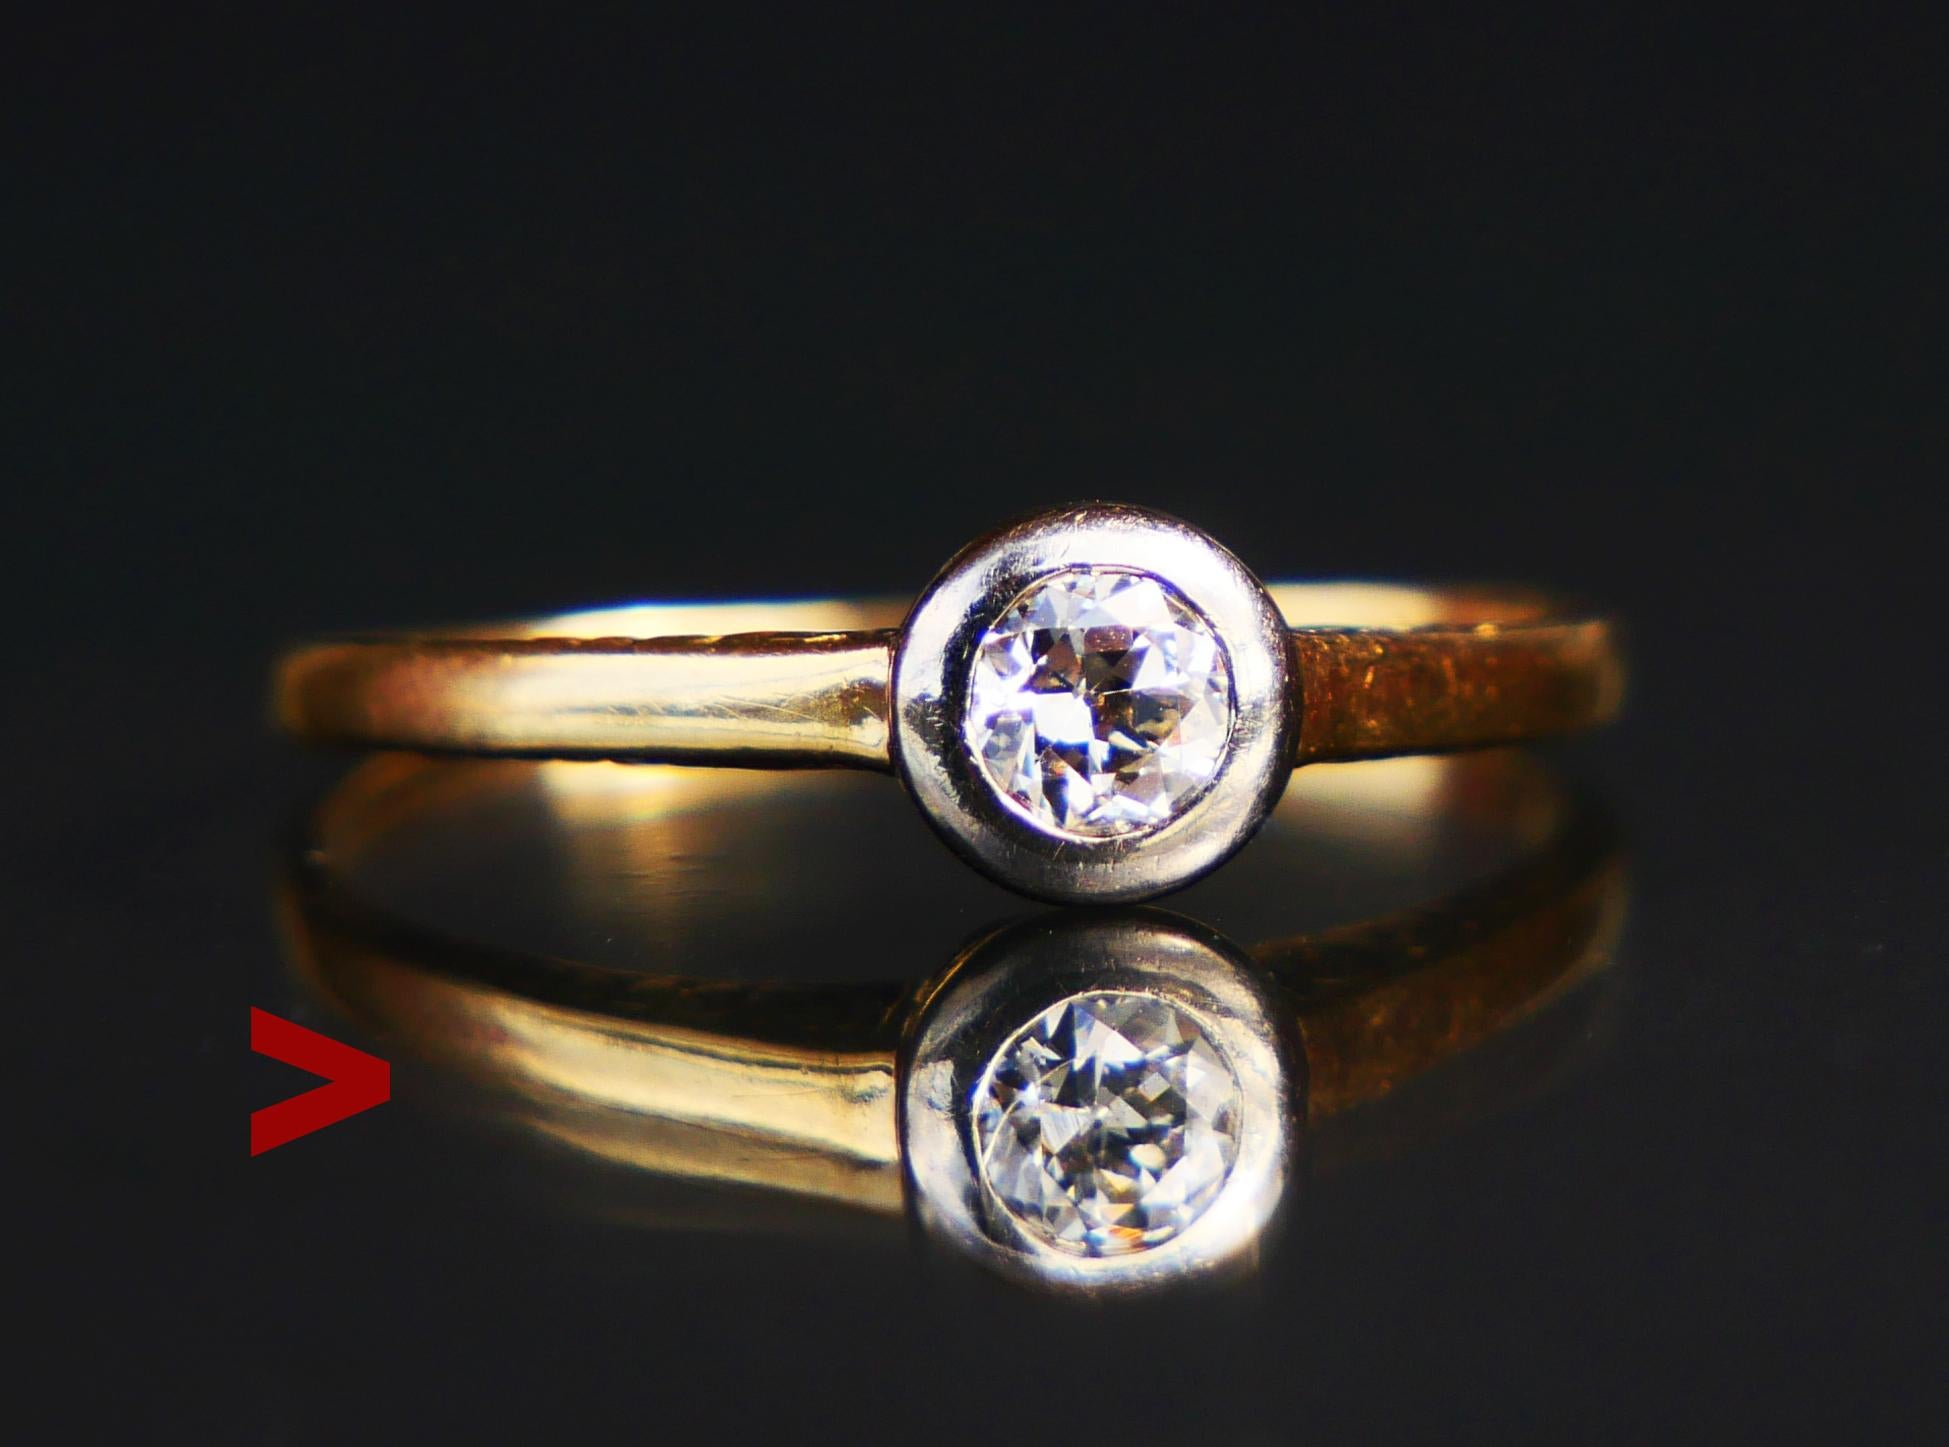 Fine Antique Ring made in Europe, ca. 1920s.

Solid 14K Yellow Gold band, carved ornaments on the shoulders. Old European cut Diamond in White Gold bezel measures Ø 4 mm x 2.2 mm deep / about 0.25 ct. Color ca H,I / SI. Stone's backside is open. The